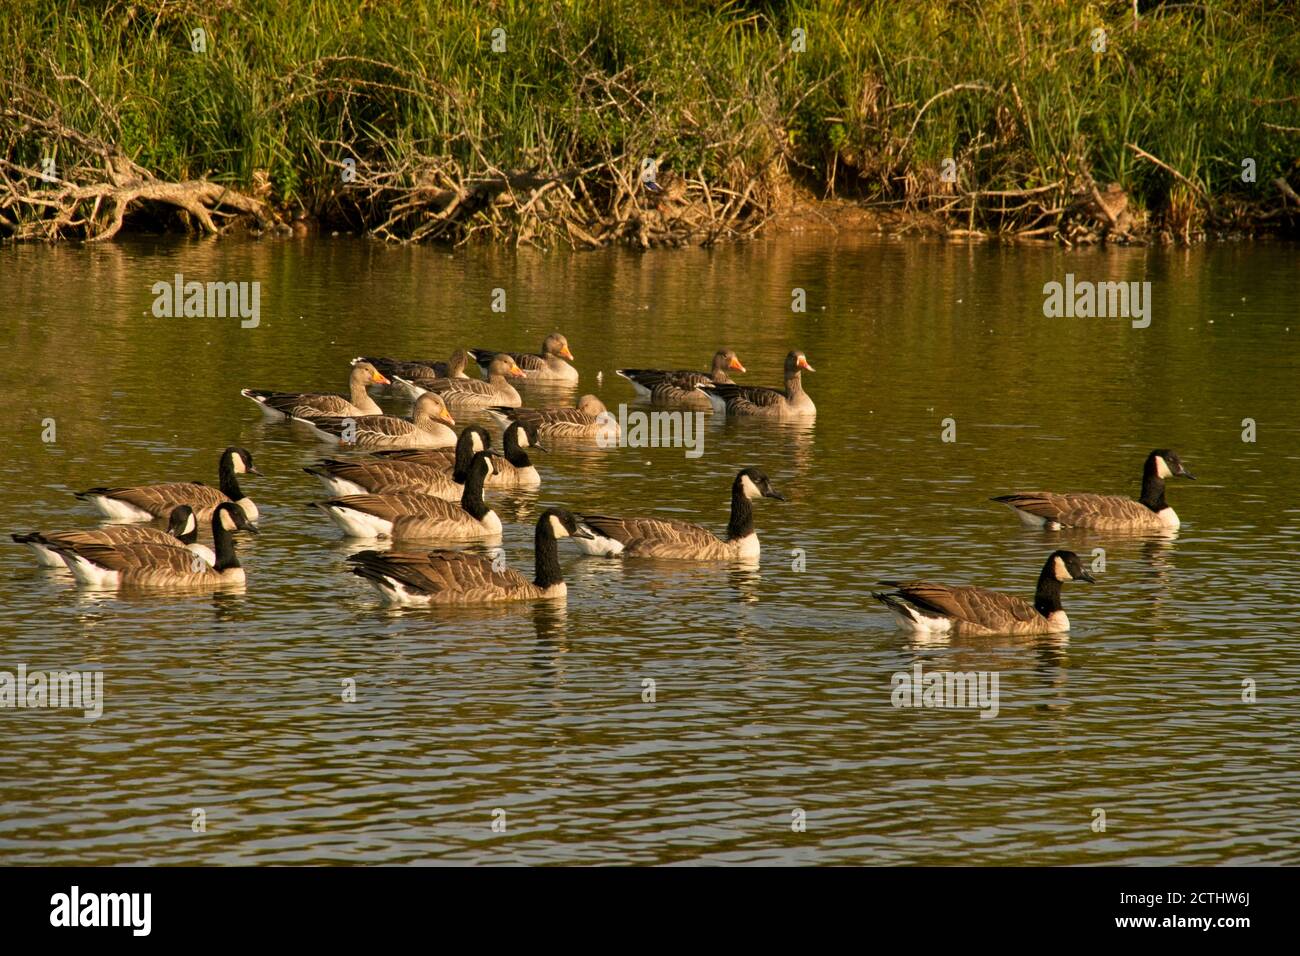 Mixture of Graylag and Canada geese swimming together in body of freshwater. Landscape format. Stock Photo